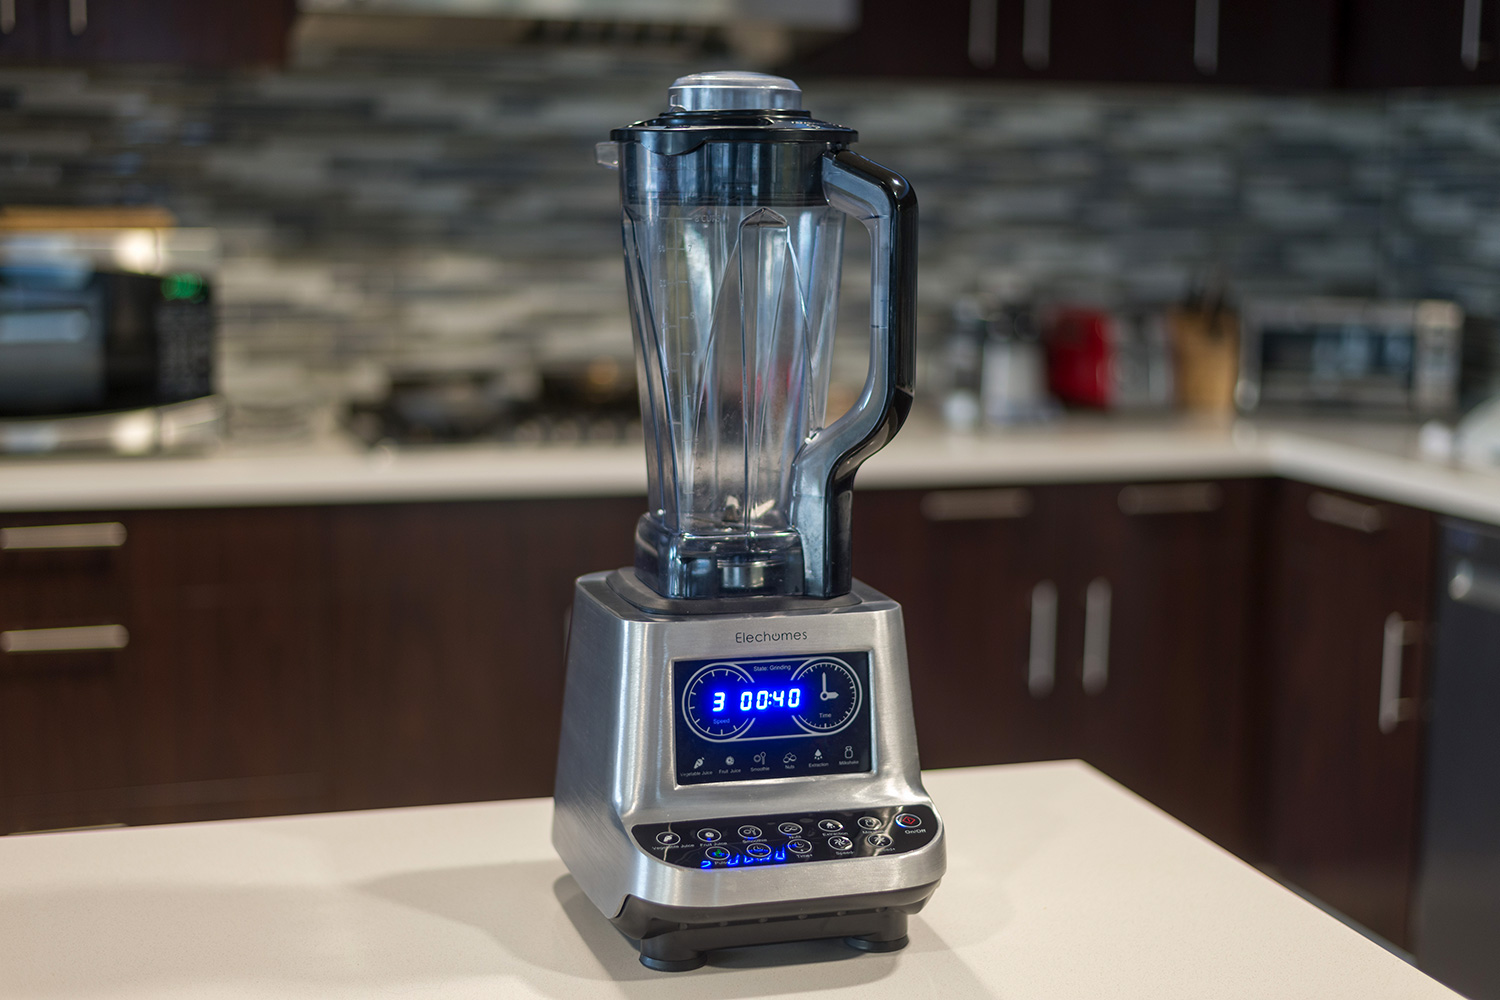 Deal Alert: This Blender Is Crazy Cheap Right Now